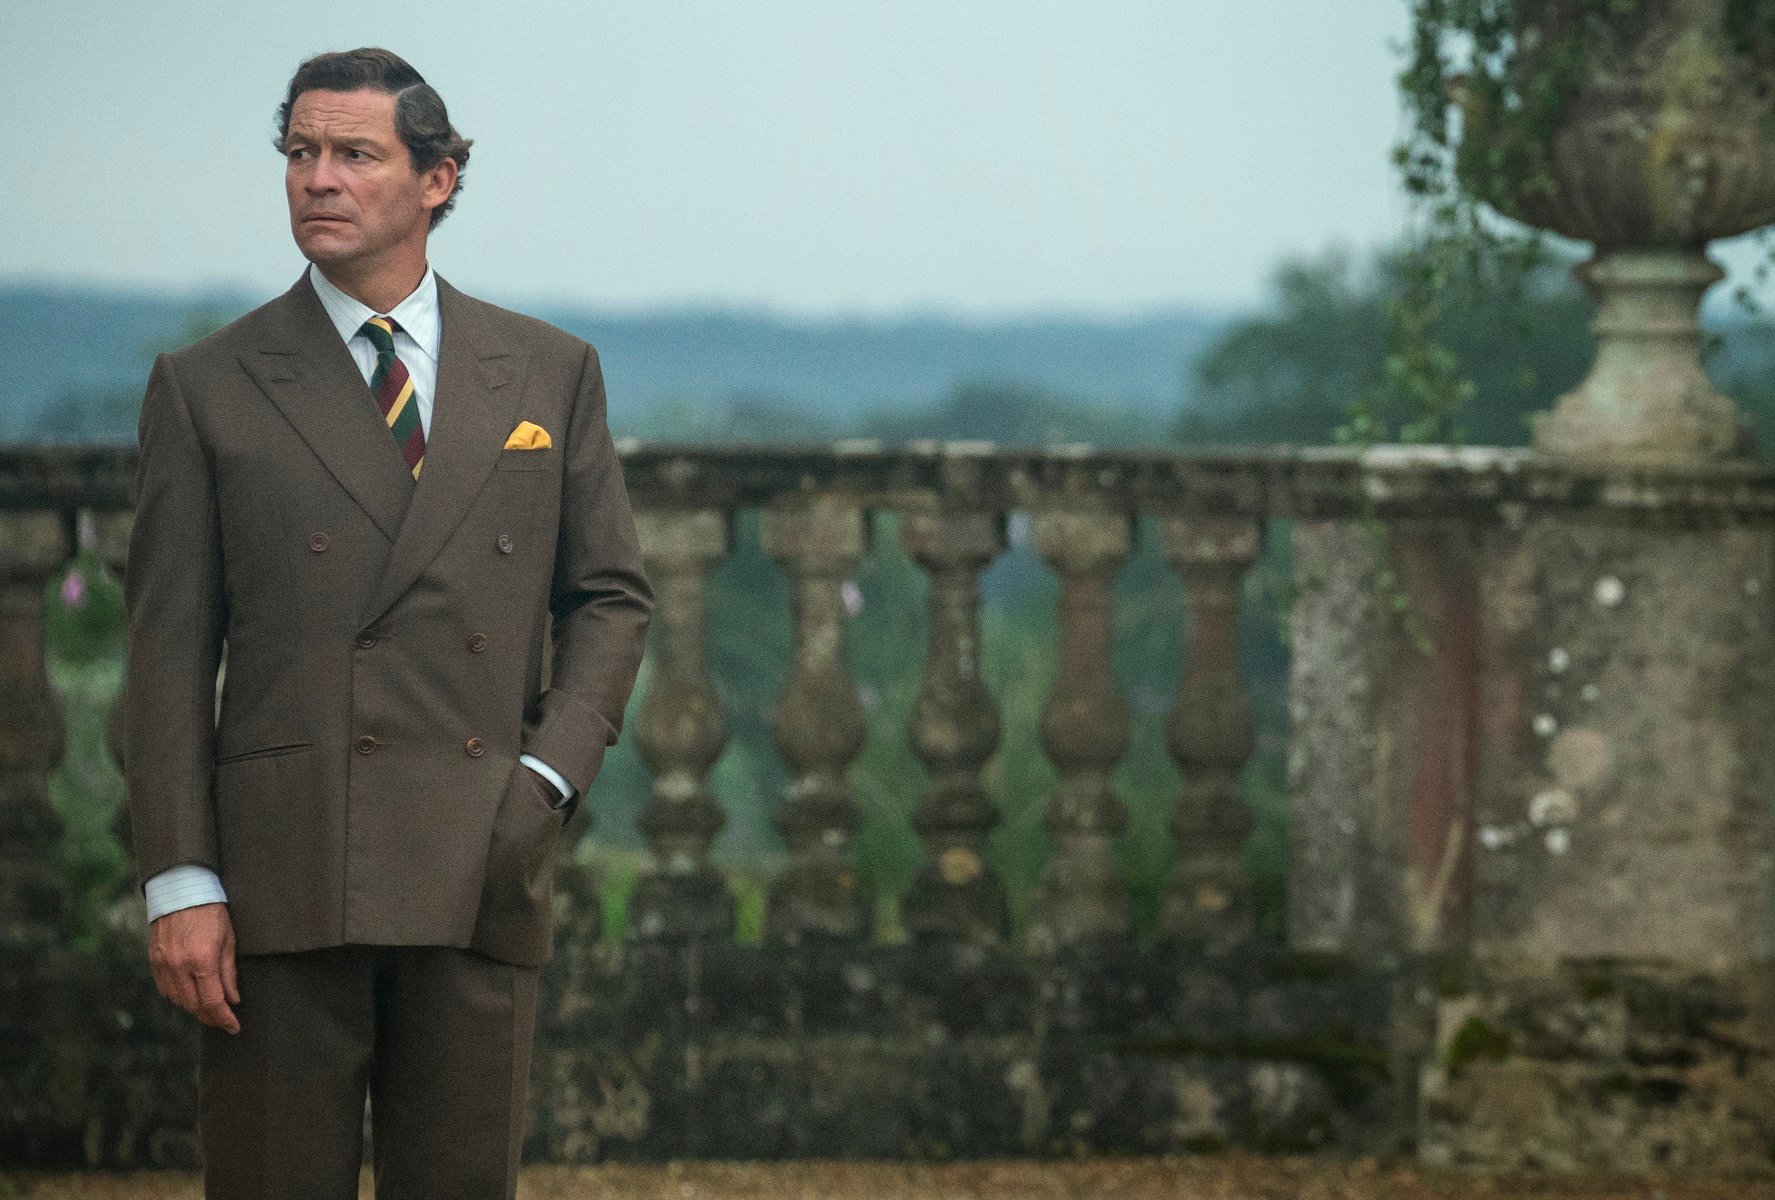 Production still from 'The Crown' season 5 featuring Dominic West as Prince Charles